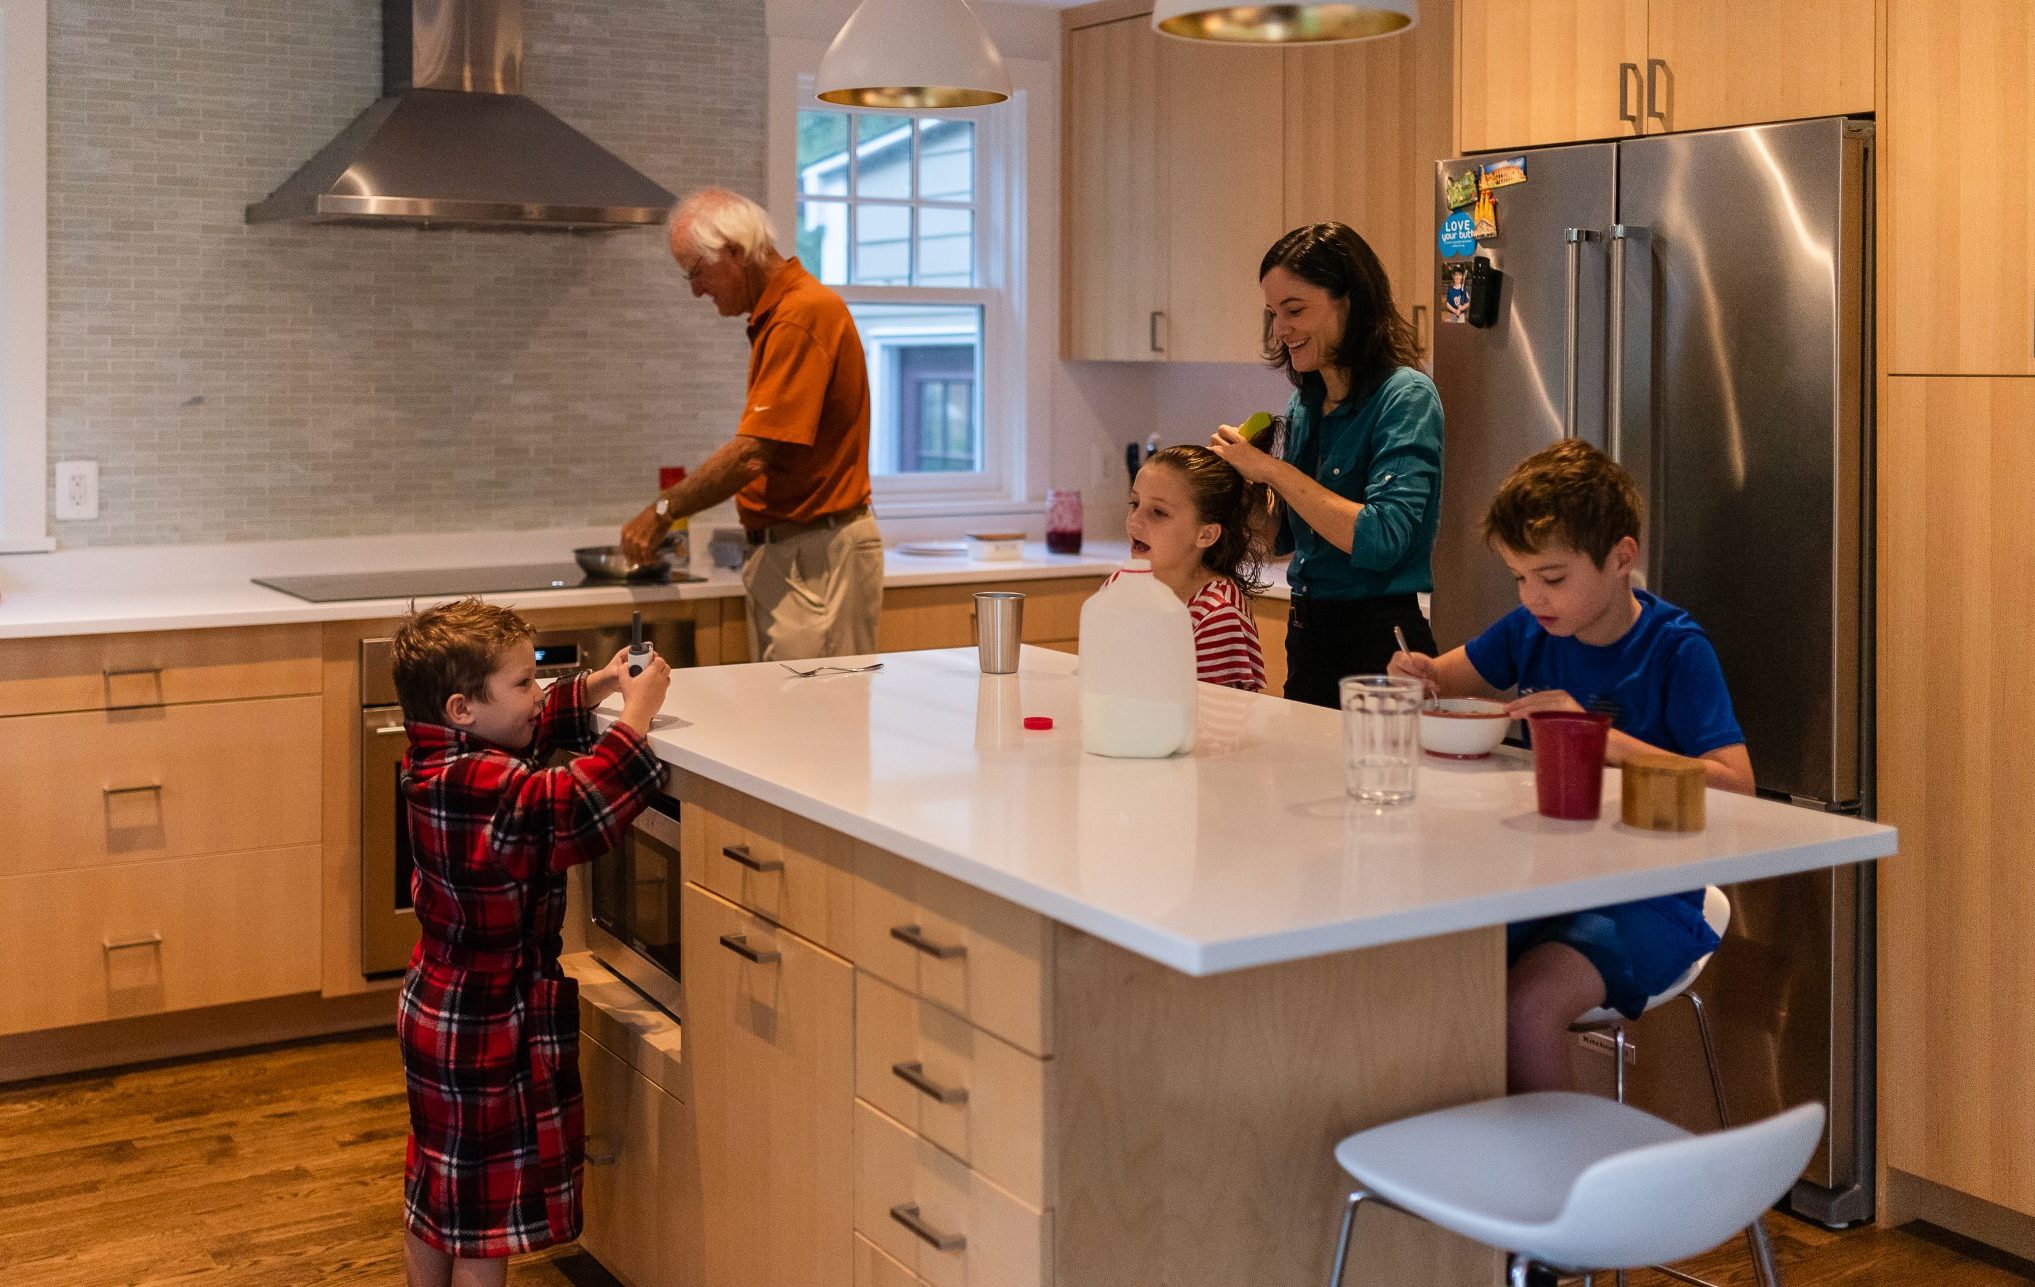 Family of DC widow blog writer Marjorie Brimley gets ready for school in kitchen